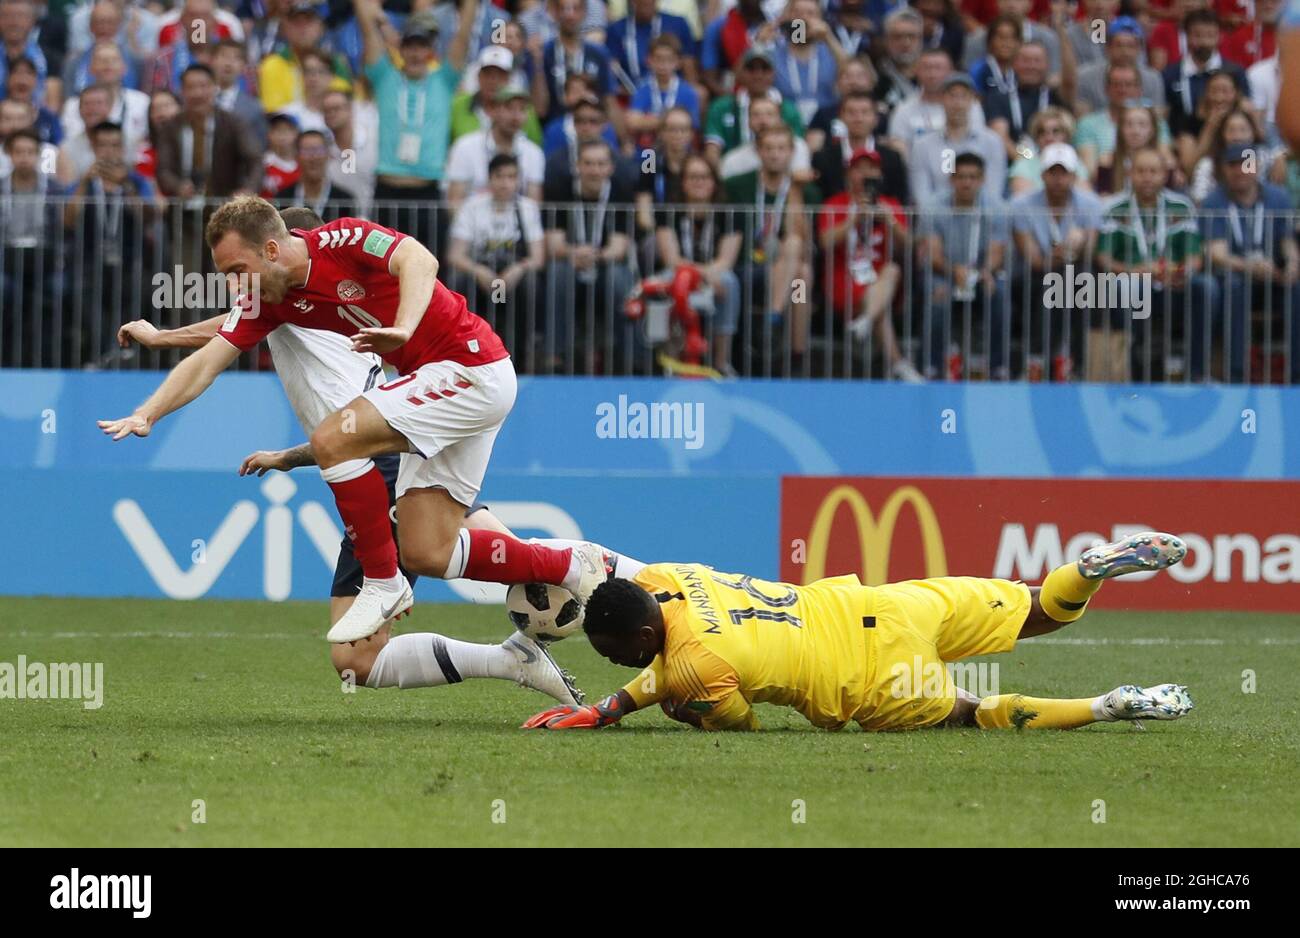 Steve Mandanda of France saves at the feet of Christian Eriksen of Denmark during the FIFA World Cup 2018 Group C match at the Luzhniki Stadium, Moscow. Picture date 26th June 2018. Picture credit should read: David Klein/Sportimage via PA Images Stock Photo